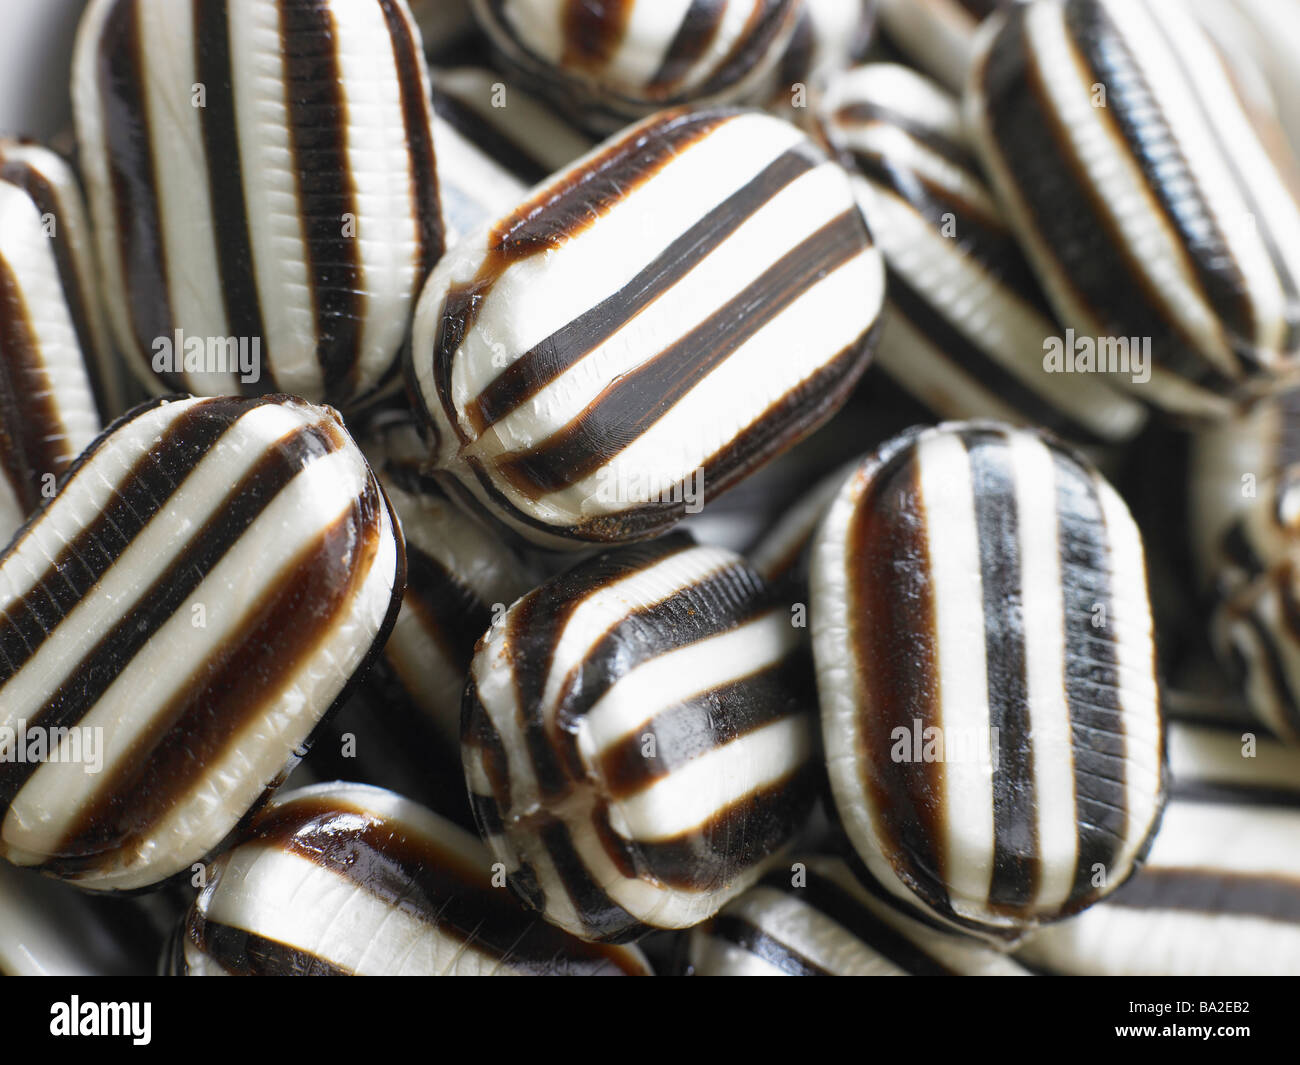 Hard Candy Humbugs In A Large Group Stock Photo